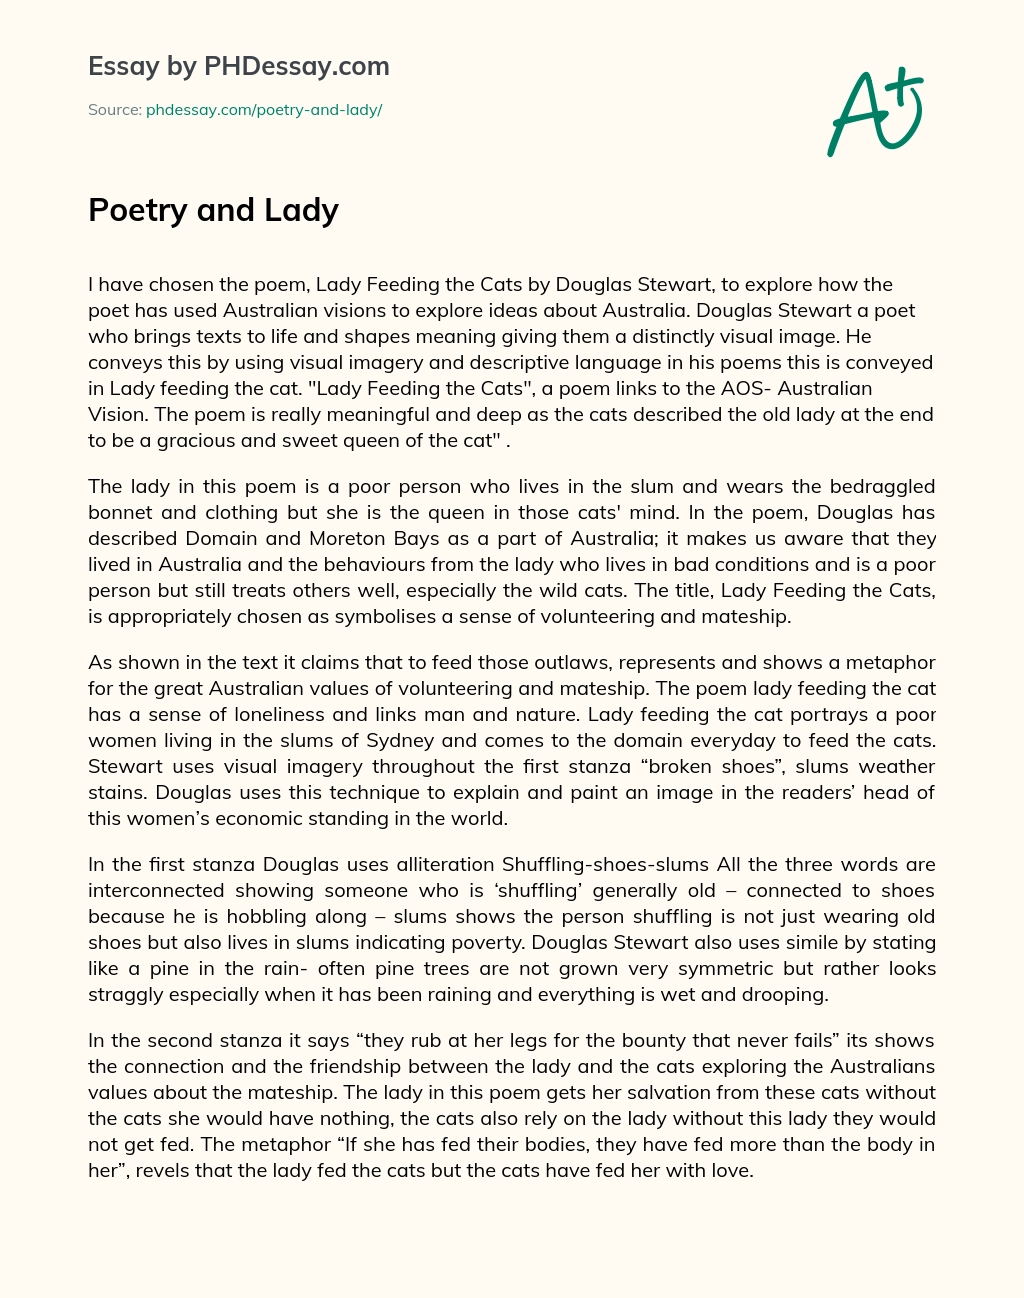 Poetry and Lady essay